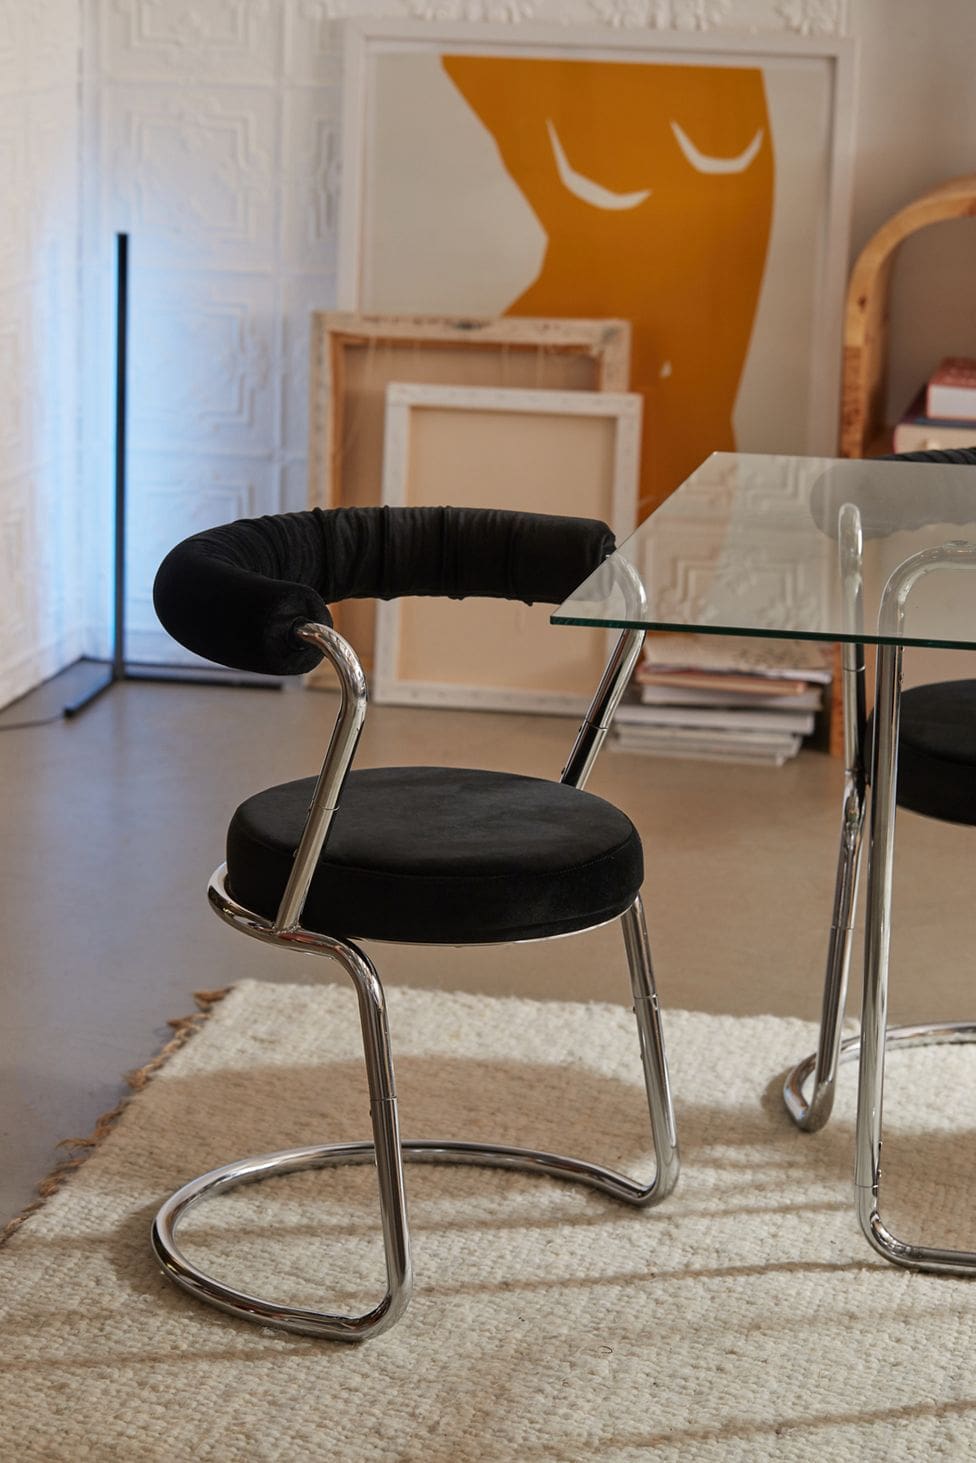 Try This Curved Dining Chair for an Ultra Modern Look